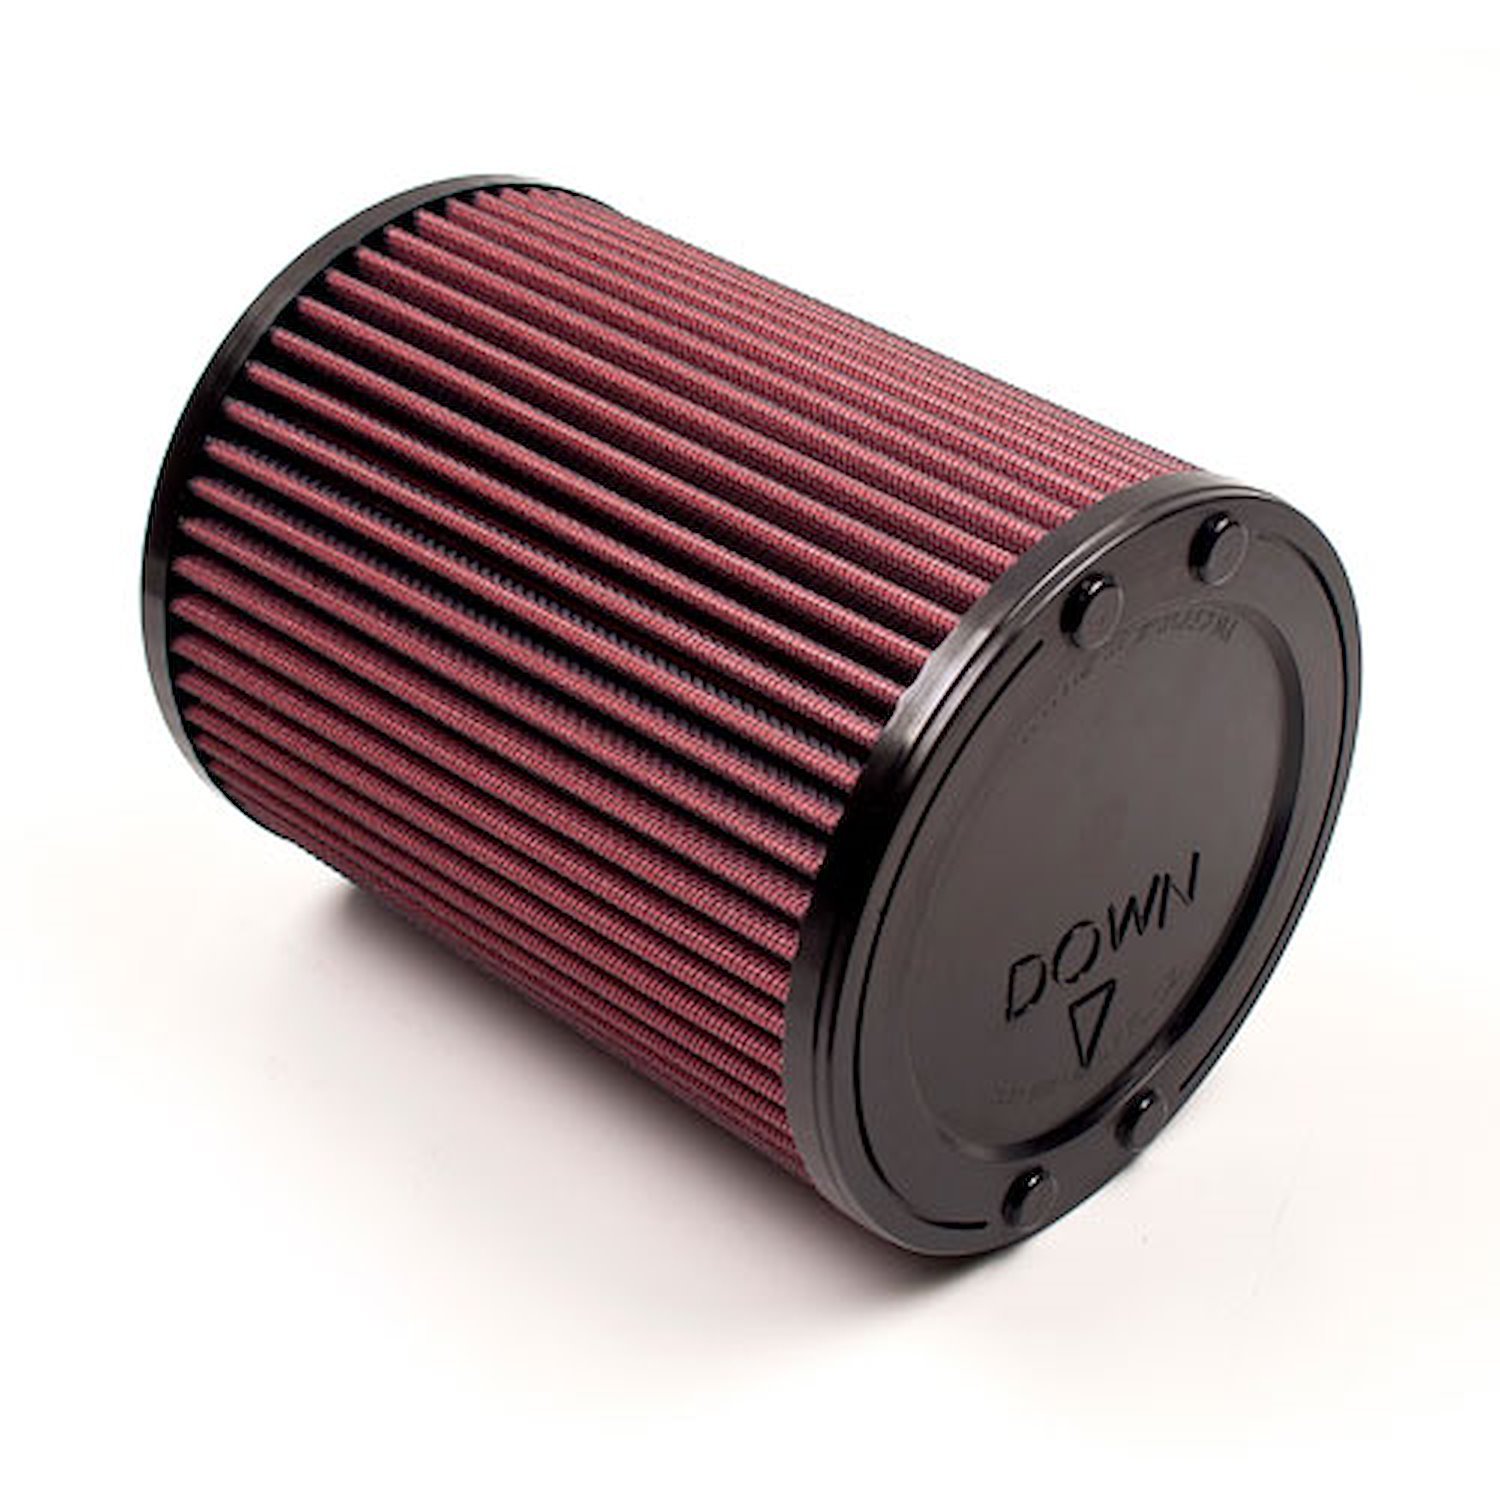 SynthaMax "Dry" OE Replacement Filter 2013 Ford Focus 2.0L